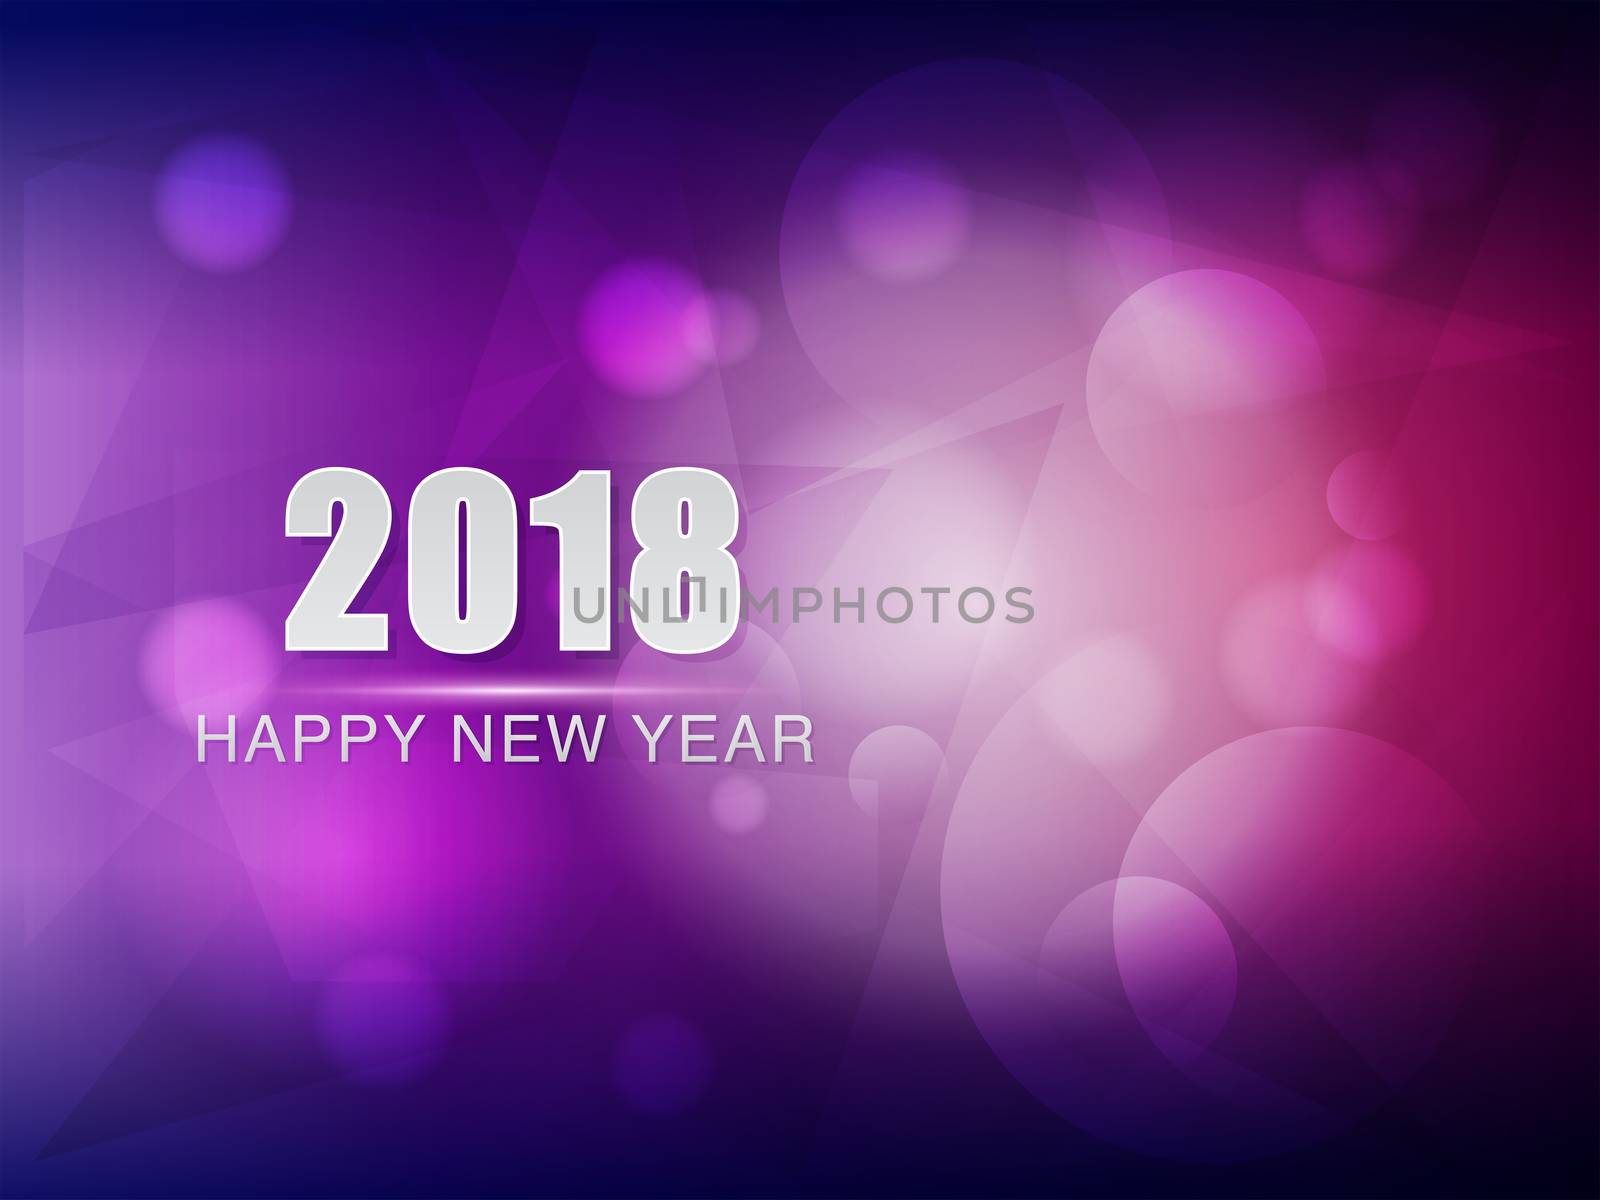 happy new year 2018, violet purple greeting card by marinini